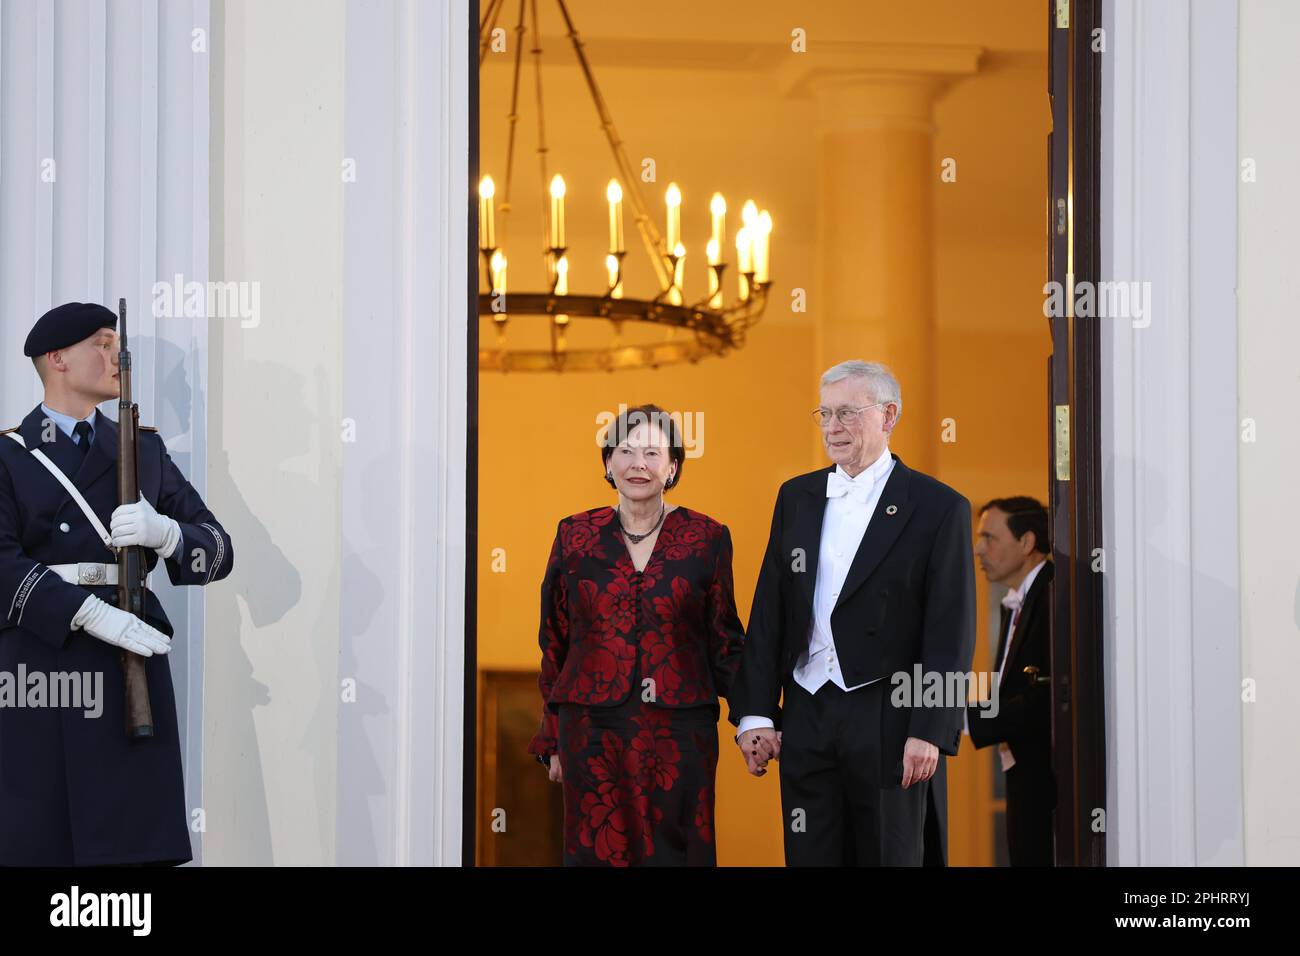 Berlin, Germany. 29th Mar, 2023. Berlin: In the evening, the Federal President invites you to a state banquet in Bellevue Palace in honor of the king. The photo shows former Federal President Prof. Dr. Horst Koehler with his wife Eva Luise Koehler (Photo by Simone Kuhlmey/Pacific Press) Credit: Pacific Press Media Production Corp./Alamy Live News Stock Photo